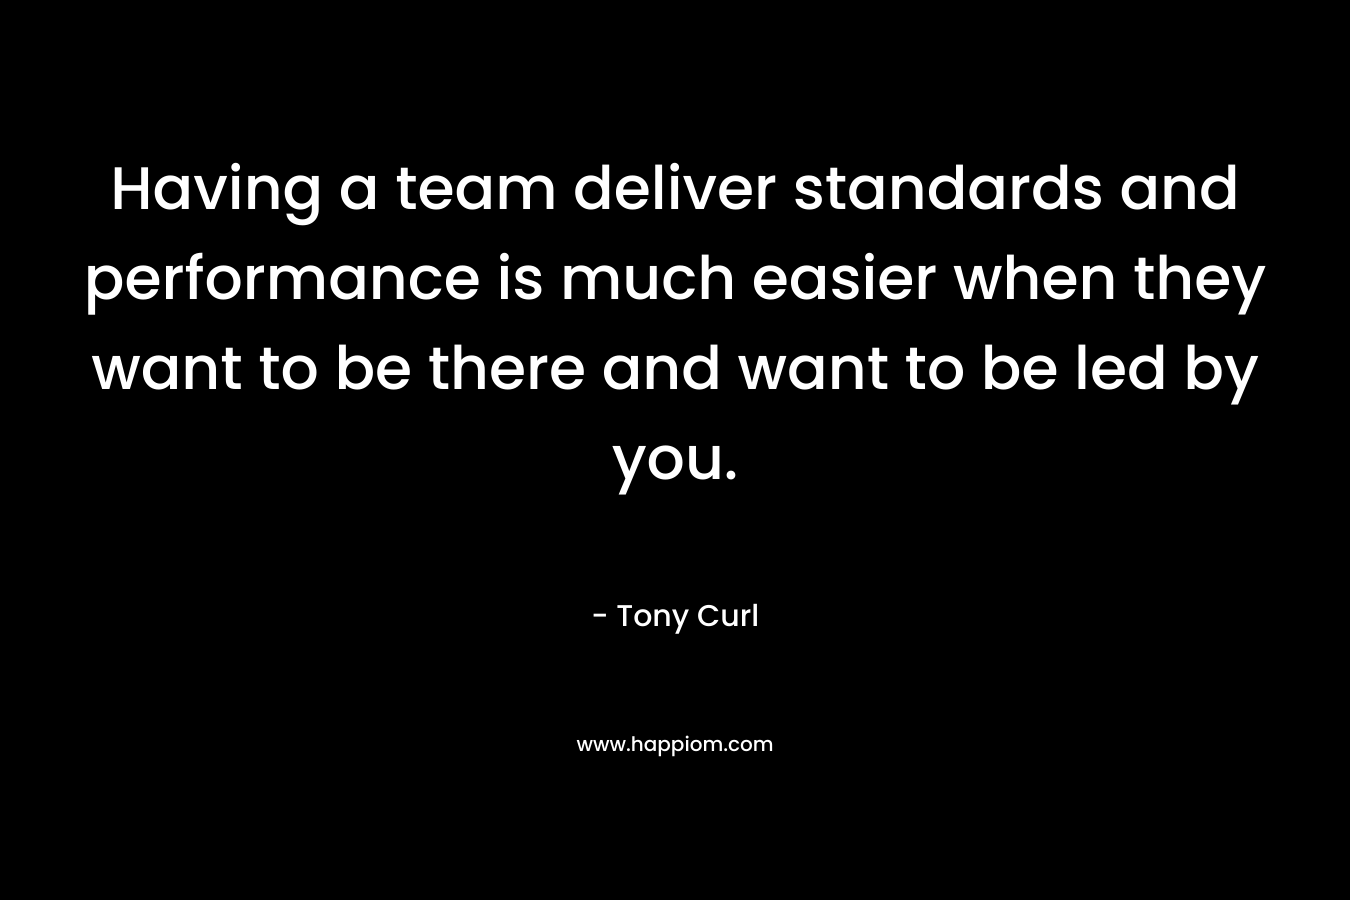 Having a team deliver standards and performance is much easier when they want to be there and want to be led by you.